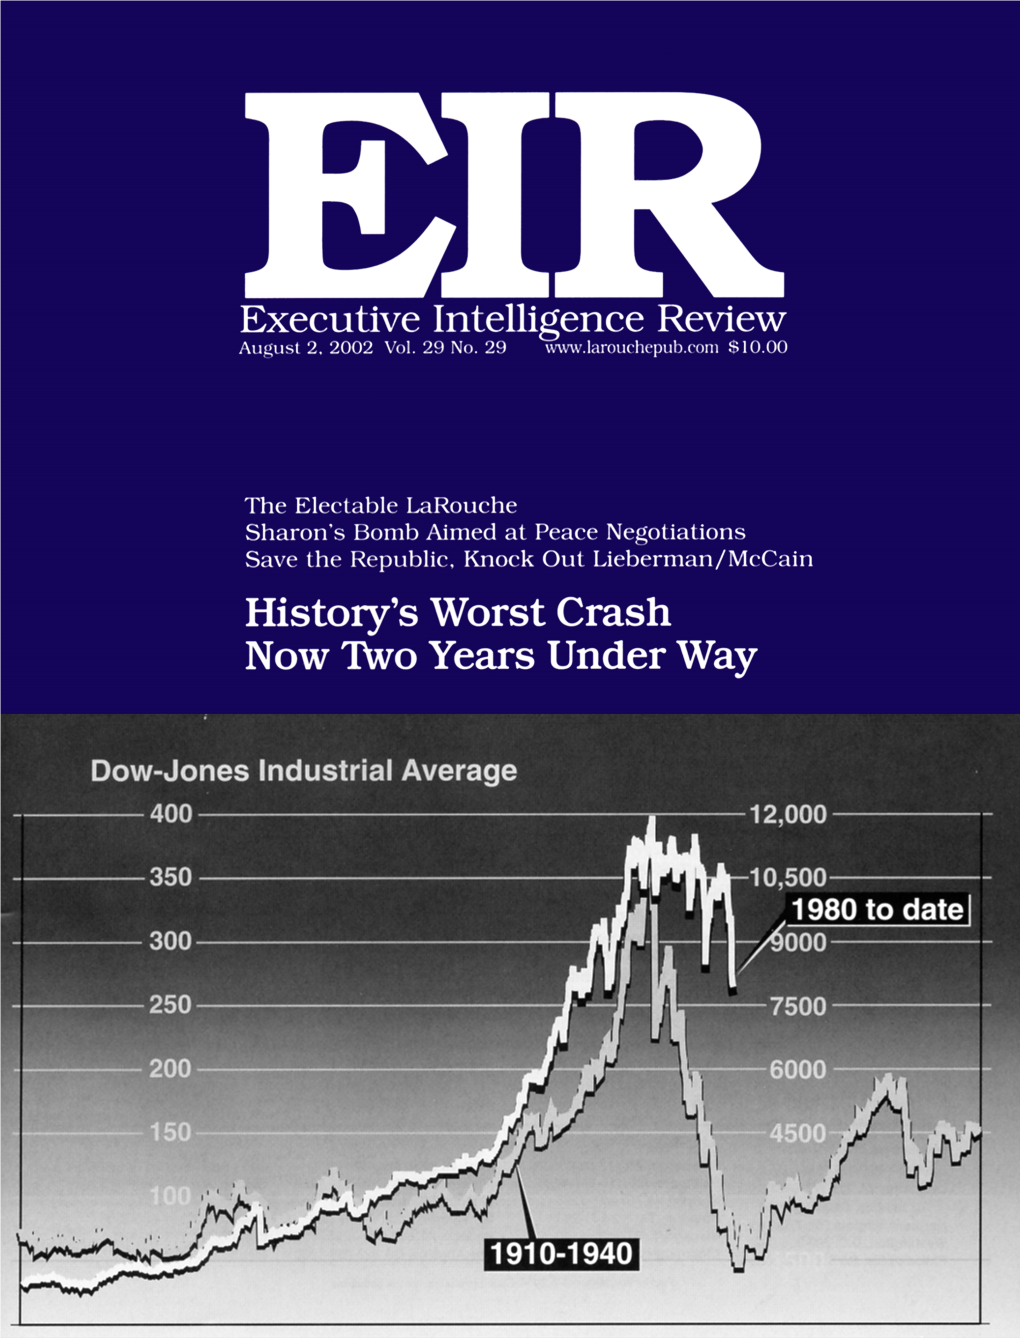 Executive Intelligence Review, Volume 29, Number 29, August 2